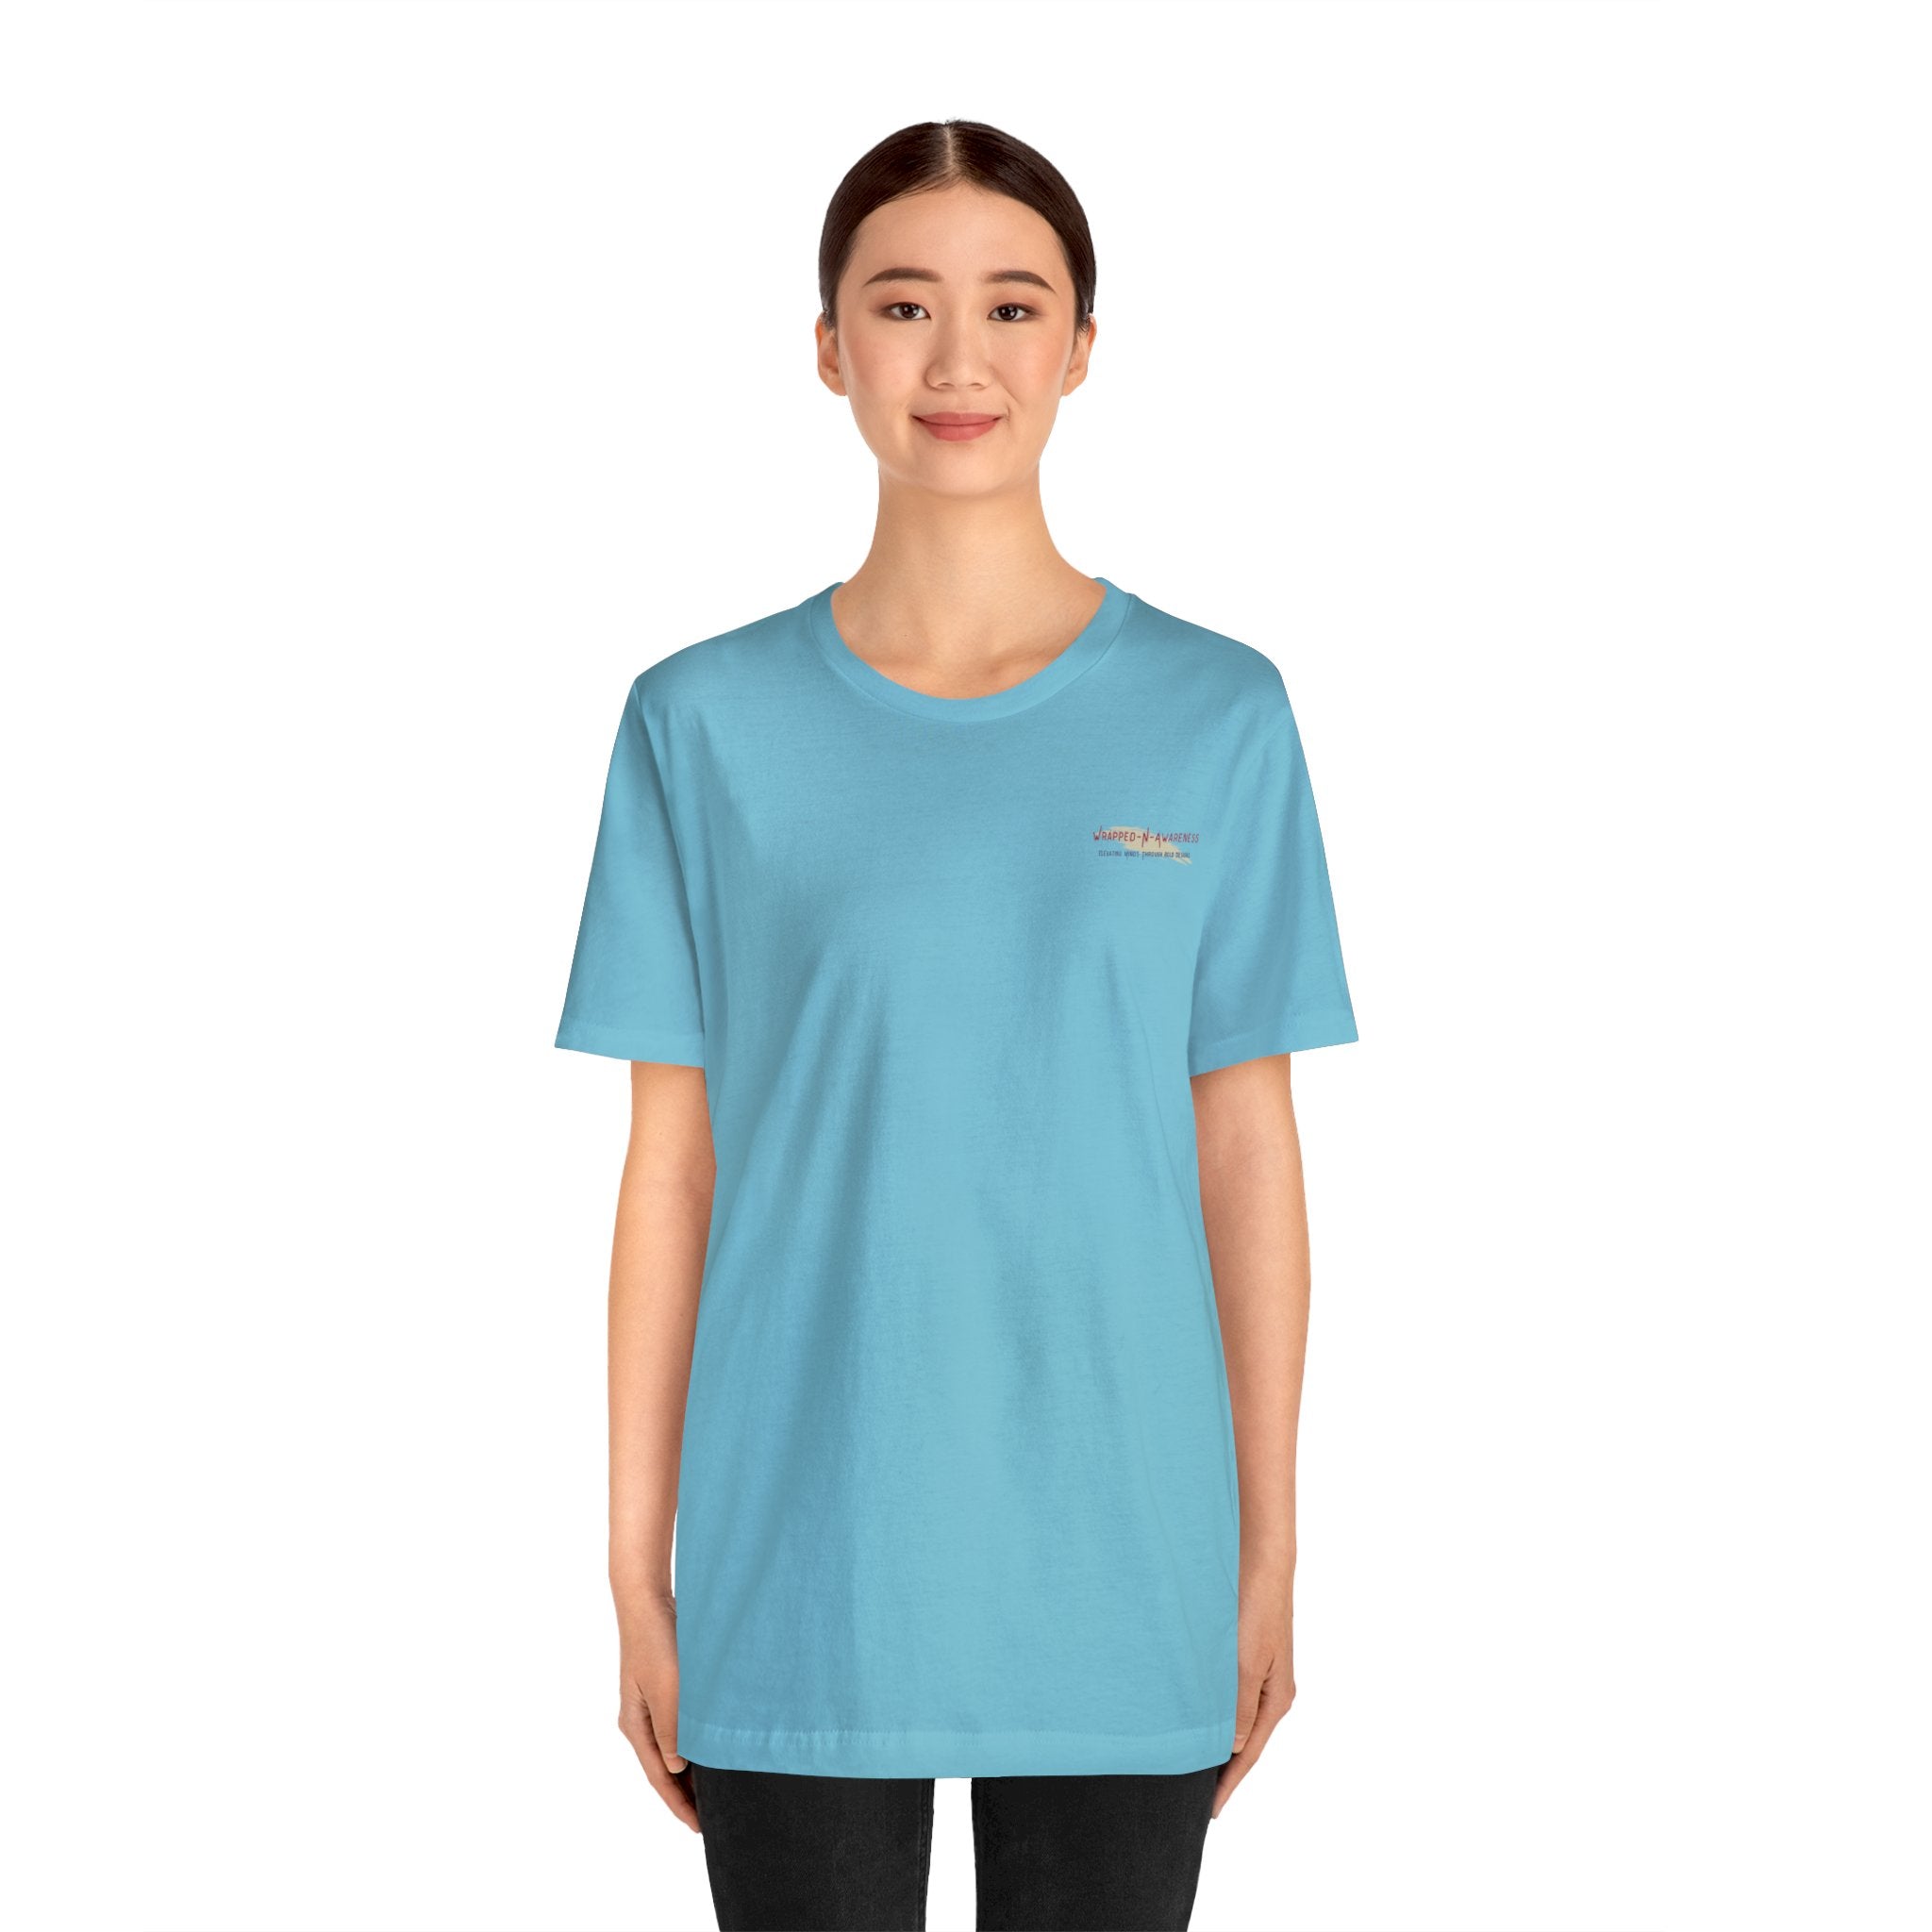 Inspire Growth Jersey Tee - Bella+Canvas 3001 Turquoise Airlume Cotton Bella+Canvas 3001 Crew Neckline Jersey Short Sleeve Lightweight Fabric Mental Health Support Retail Fit Tear-away Label Tee Unisex Tee T-Shirt 5607756953235954307_2048 Printify